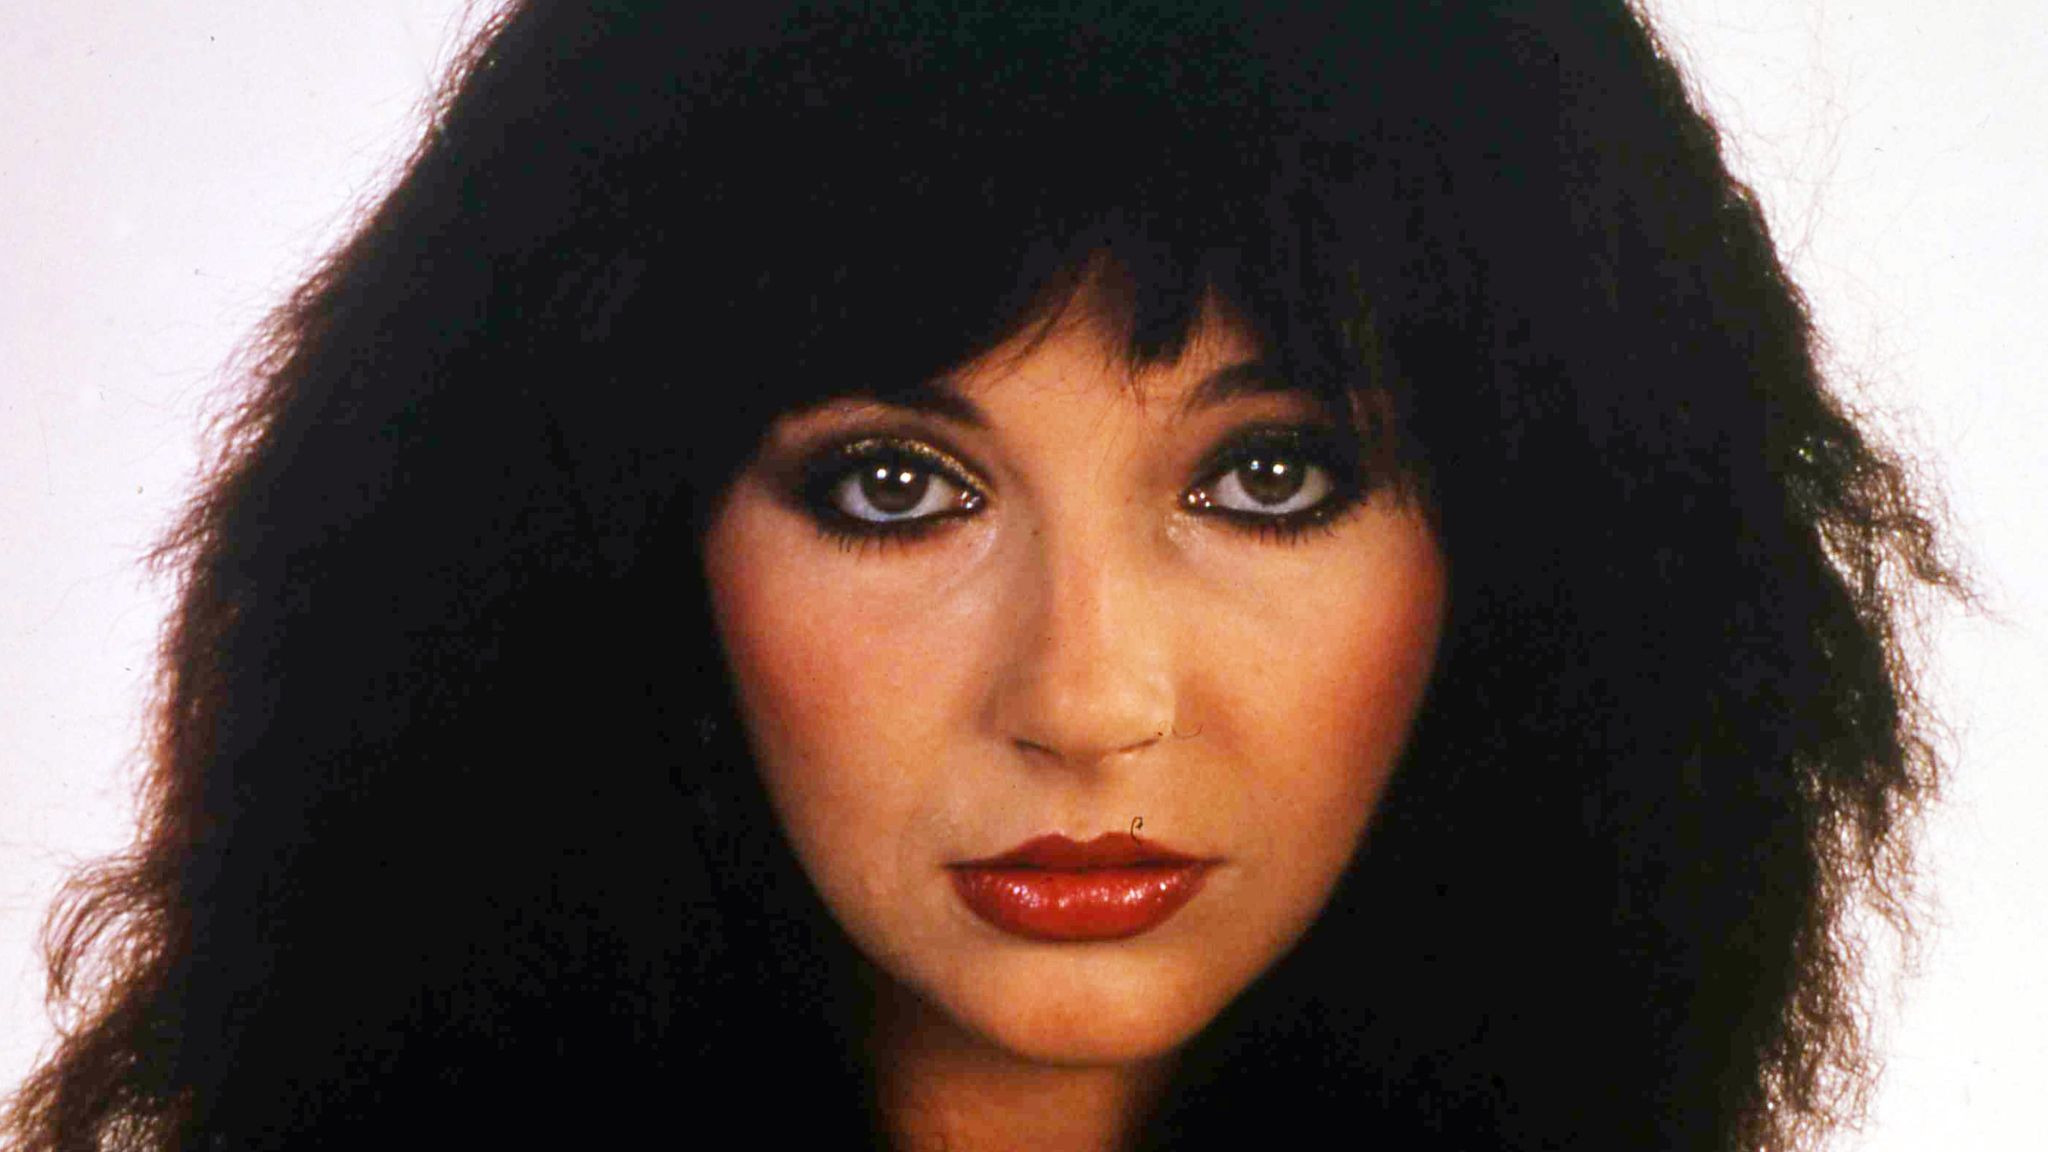 Kate Bush's Running Up That Hill tops UK chart 37 years after